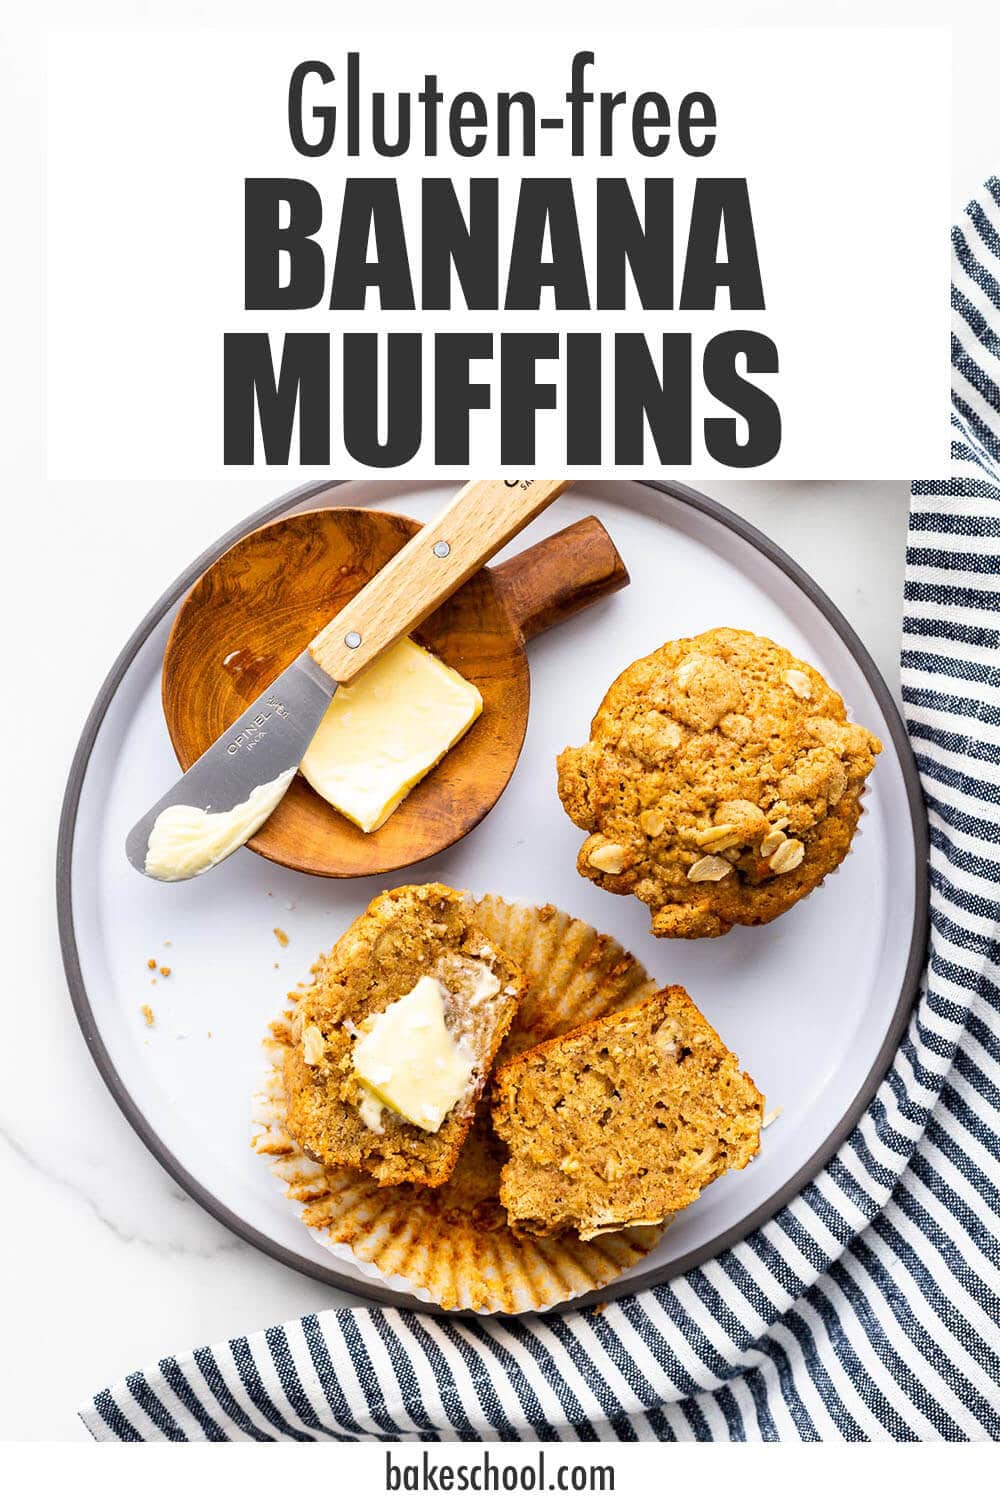 Banana muffins on a grey ceramic plate with butter and a striped napkin.